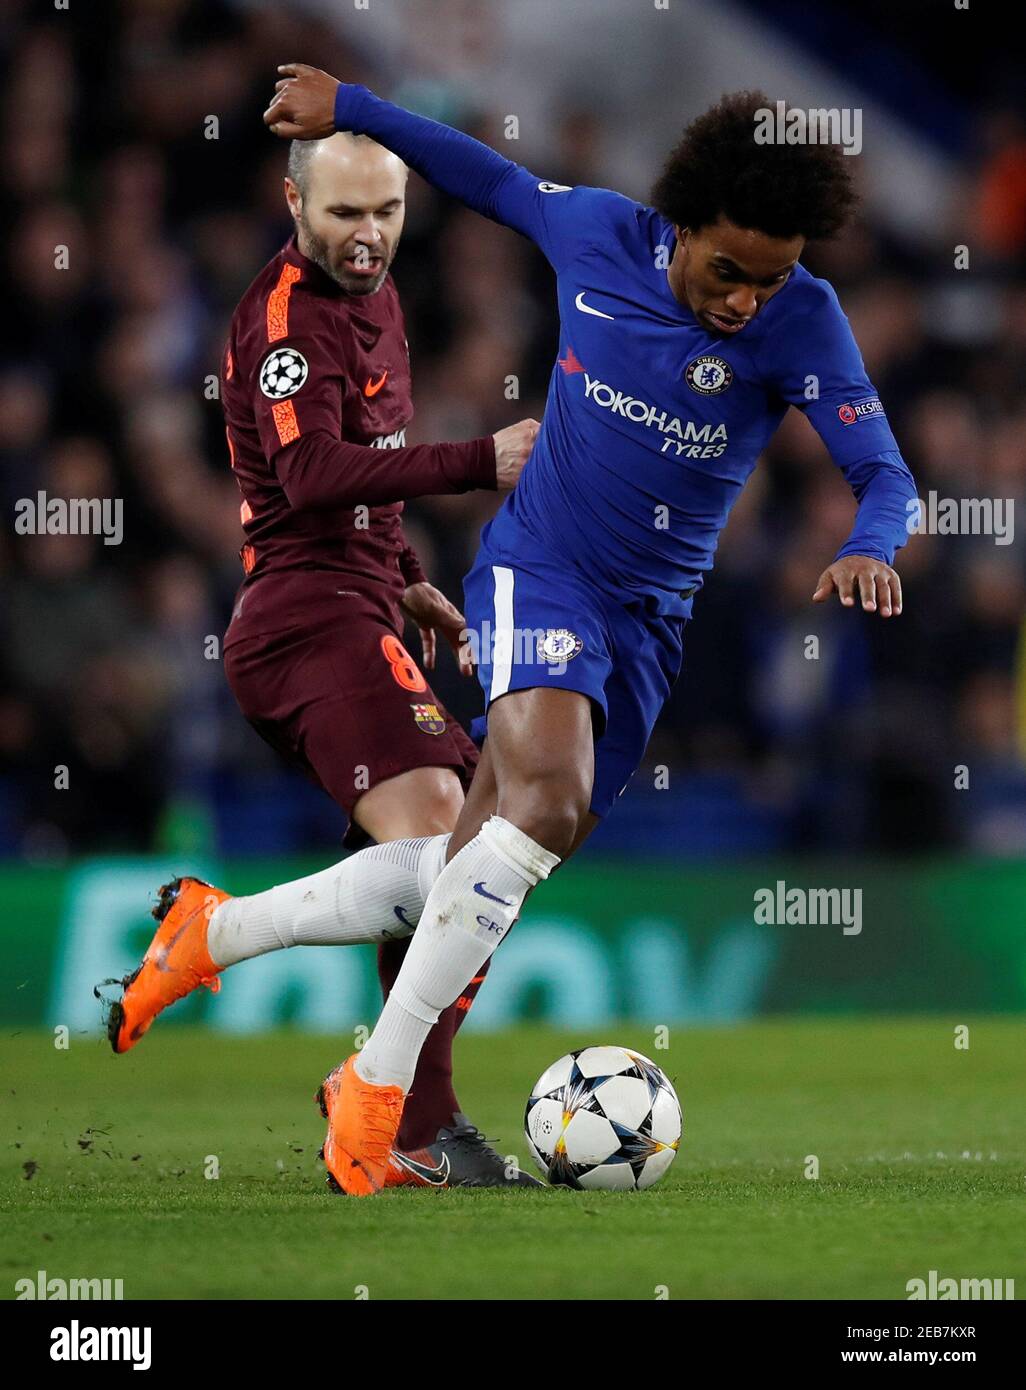 Soccer Football - Champions League Round of 16 First Leg - Chelsea vs FC Barcelona - Stamford Bridge, London, Britain - February 20, 2018   Chelsea's Willian in action with Barcelona’s Andres Iniesta   REUTERS/Eddie Keogh Stock Photo